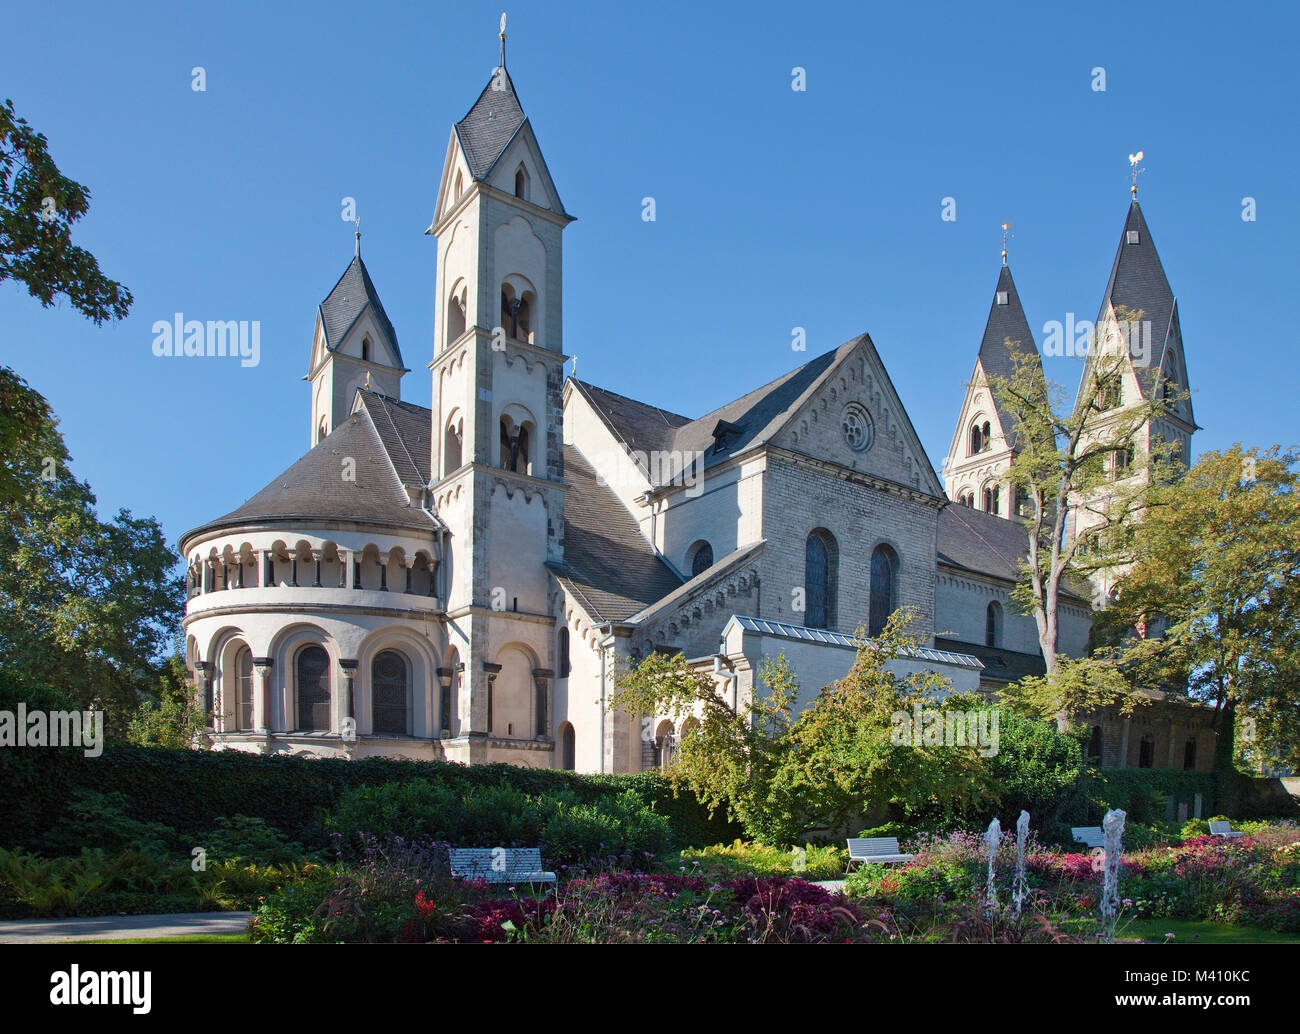 Basilica of St. Castor at old town, oldest church of Coblenz, UNESCO World Heritage cultural site, Rhineland-Palatinate, Germany, Europe Stock Photo